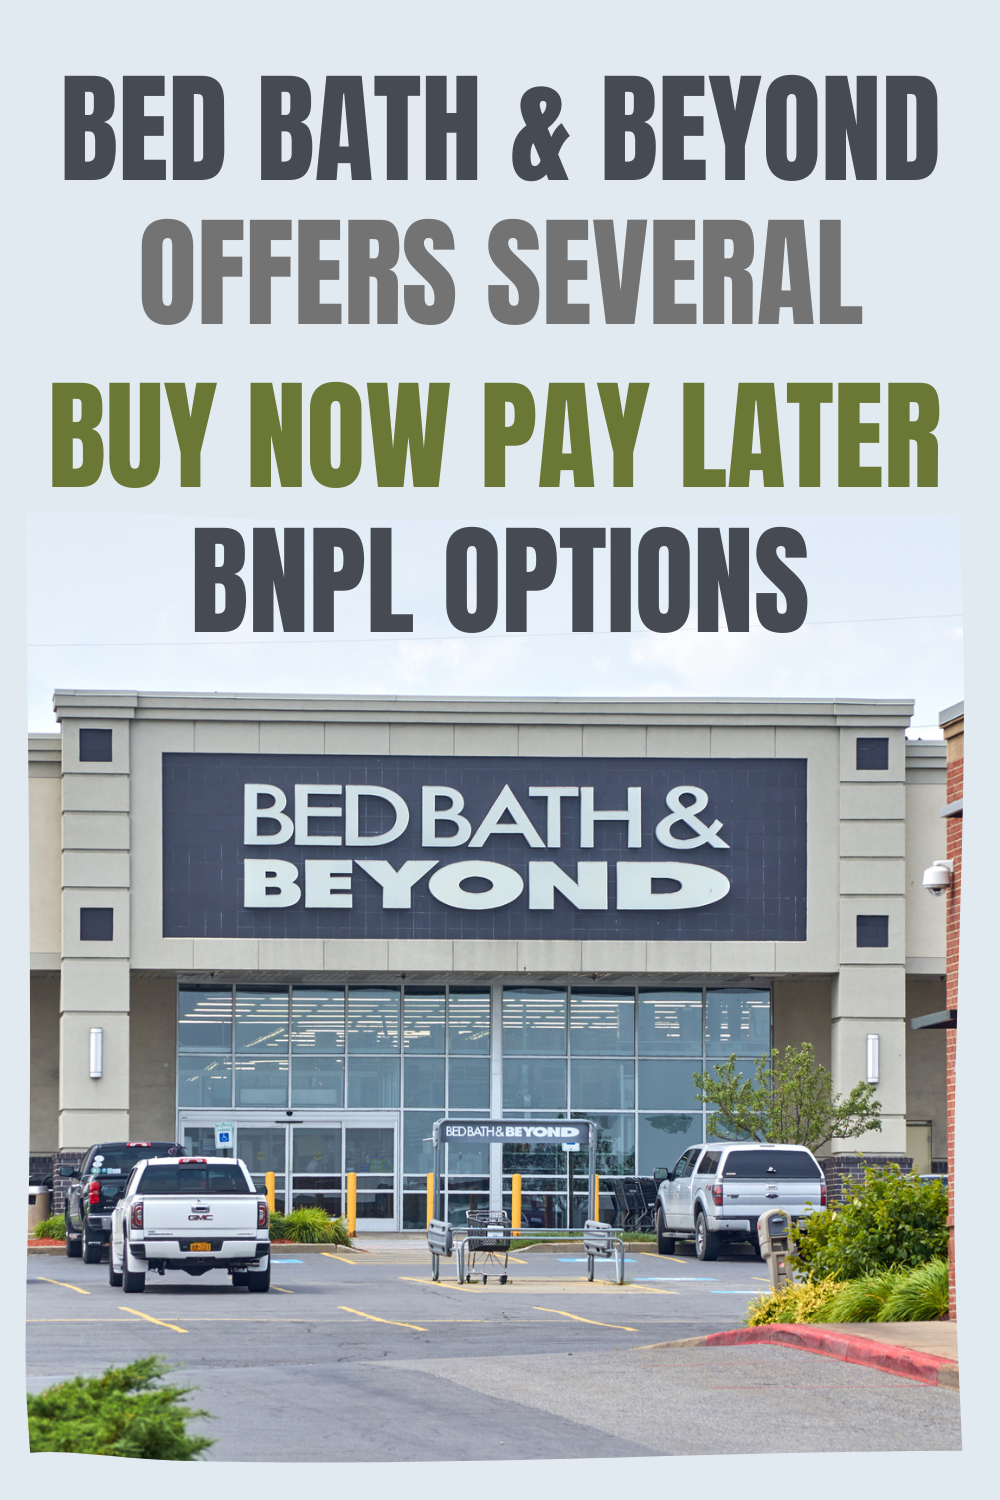 Bed Bath & Beyond offers several financing options to buy now, and pay later